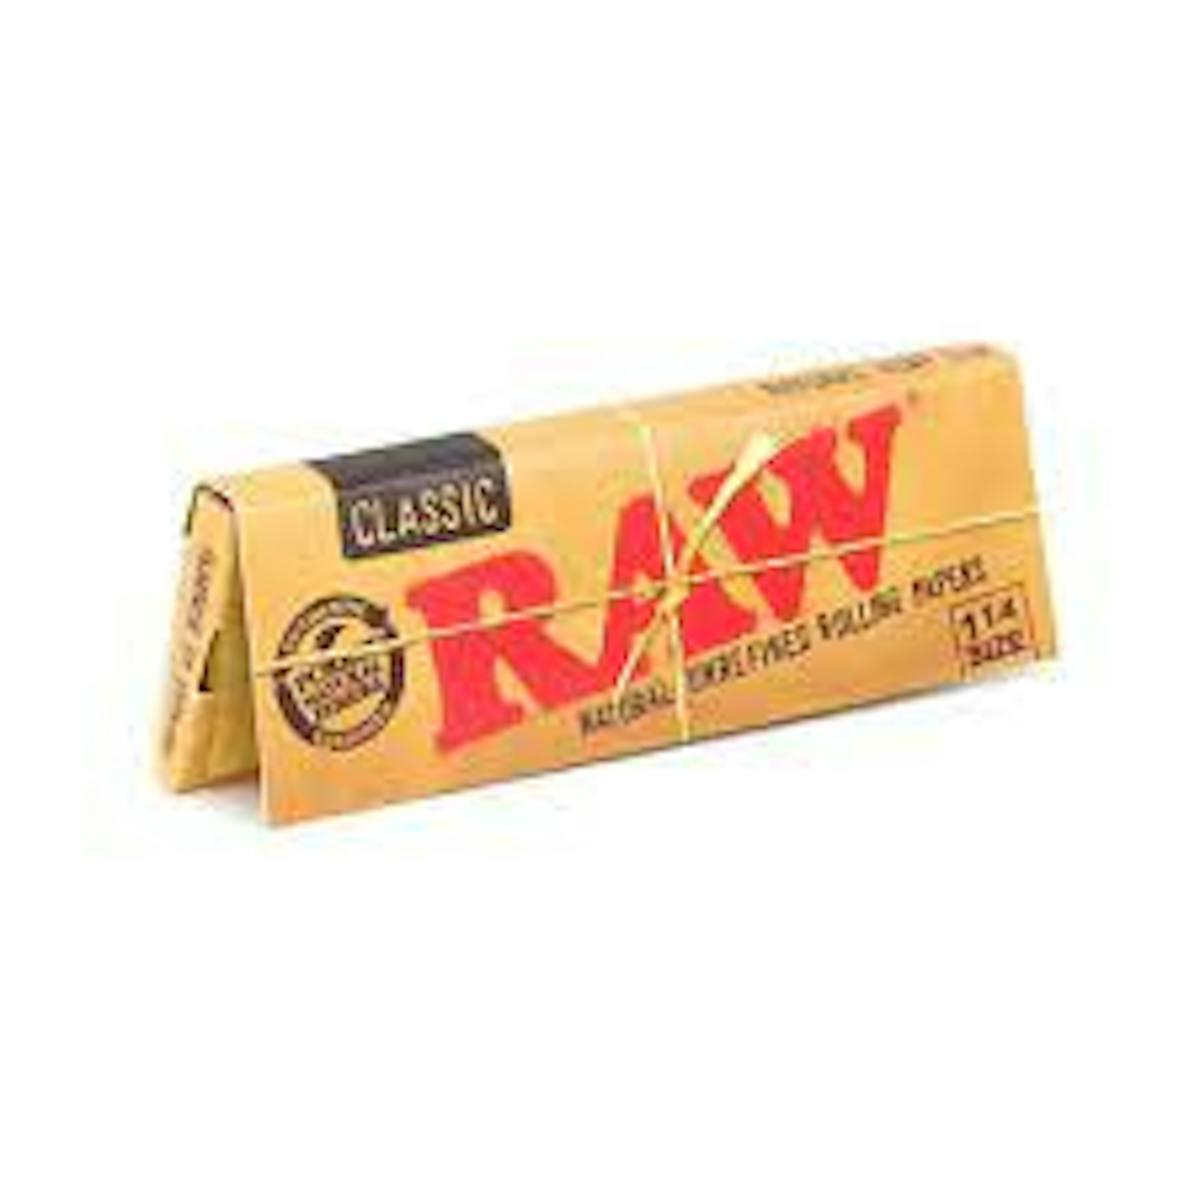 Image of Raw 1 1/4 Papers | Classic